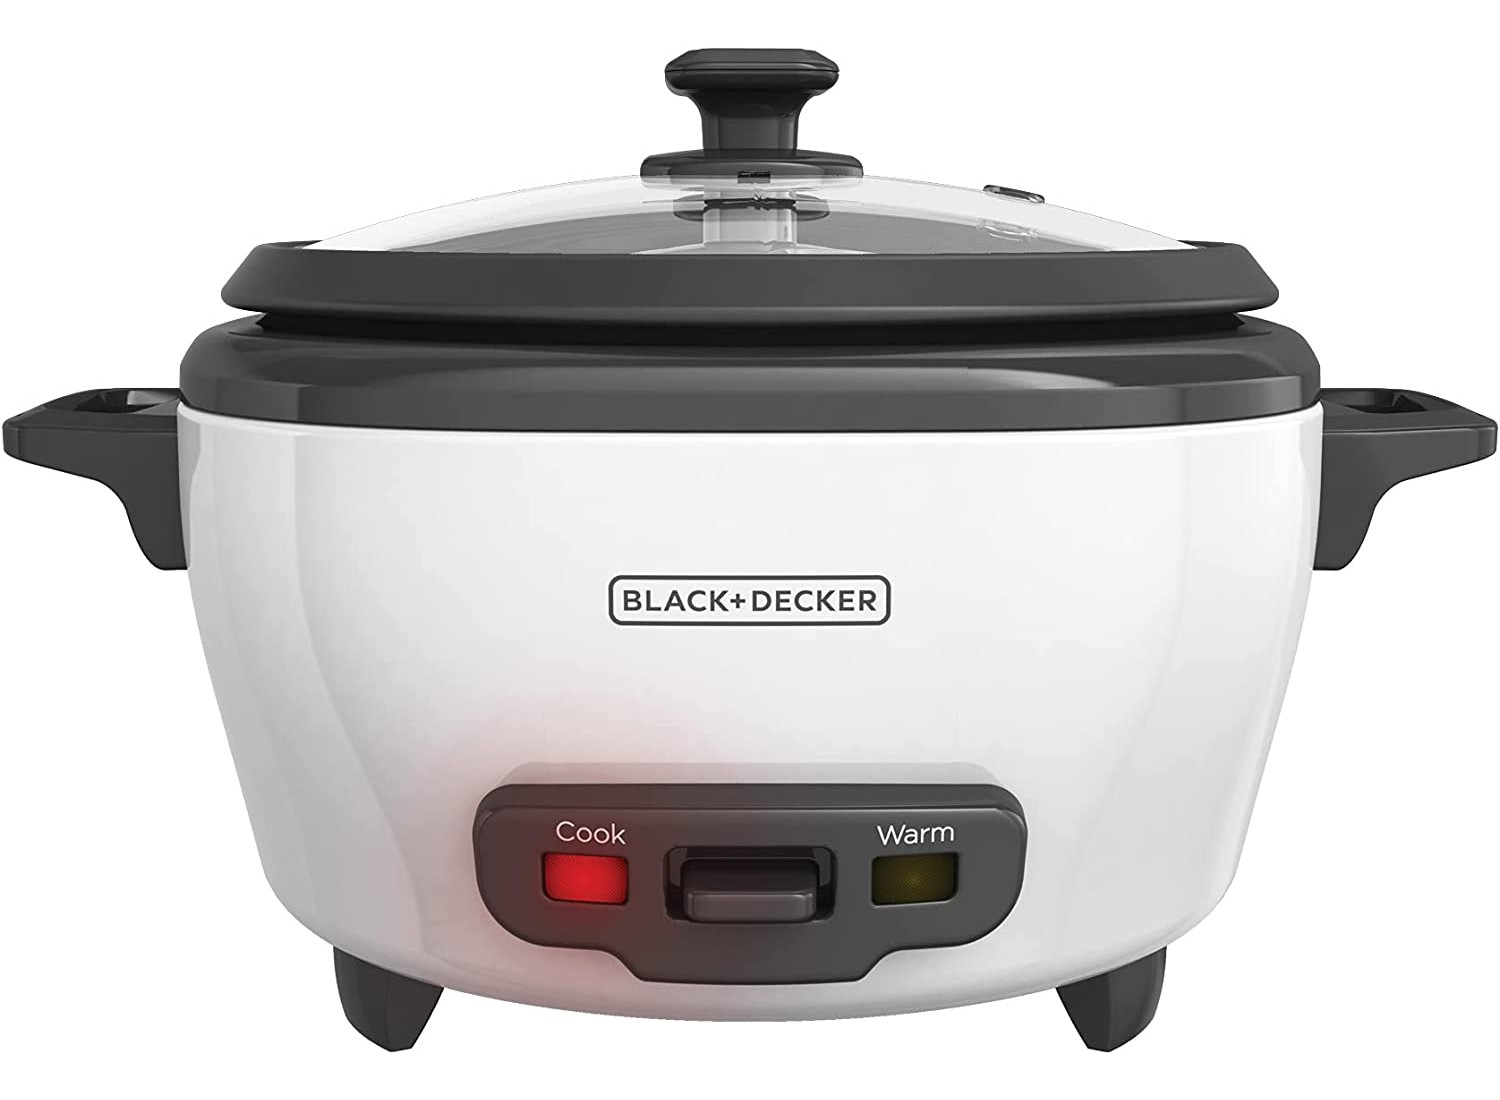 https://www.brit.co/reviews/wp-content/uploads/2023/06/BLACKDECKER-Six-cup-rice-cooker-britco.jpg